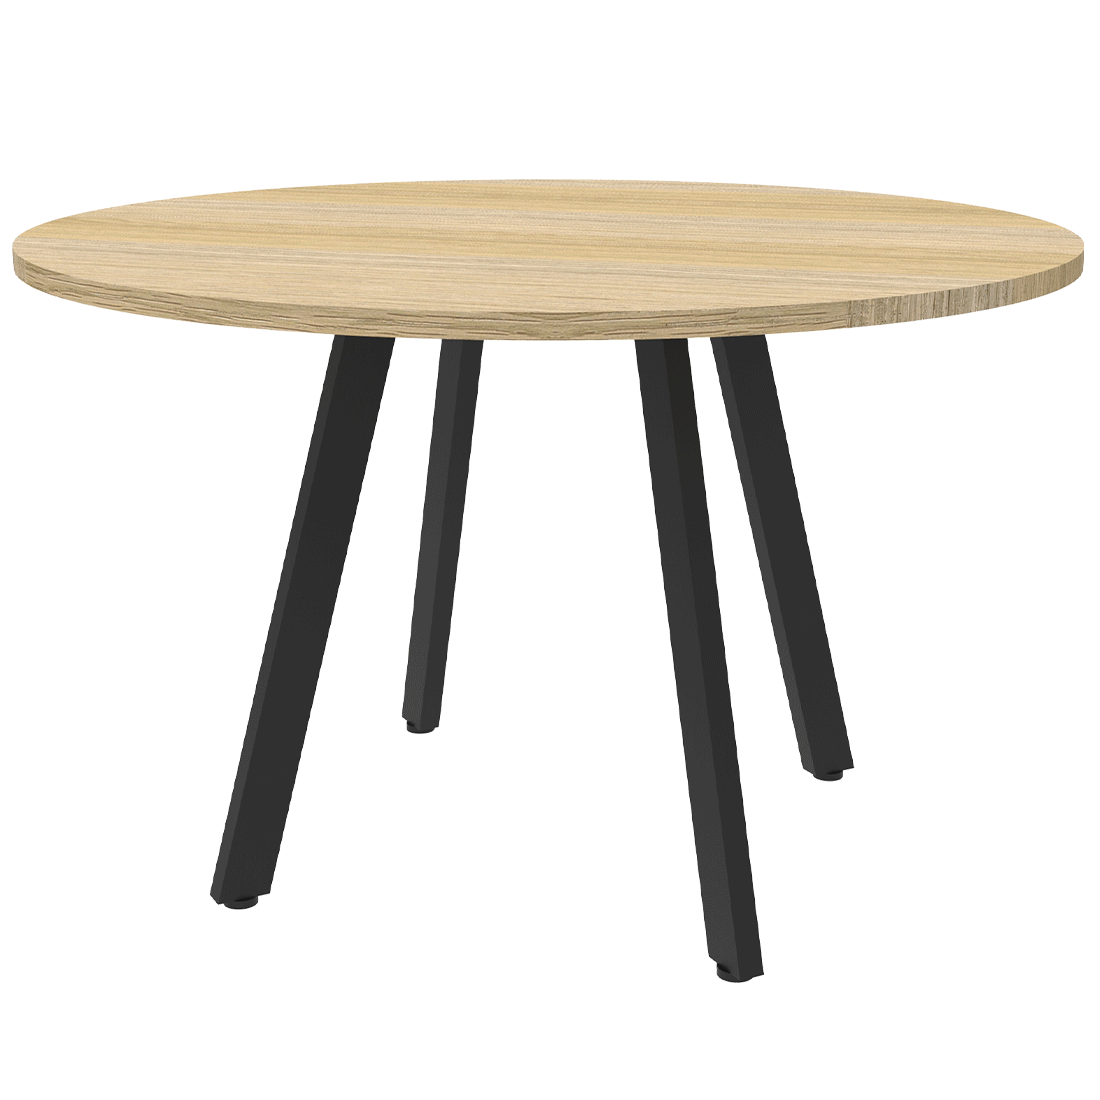 Deluxe Eternity Round Meeting Table - switchoffice.com.au